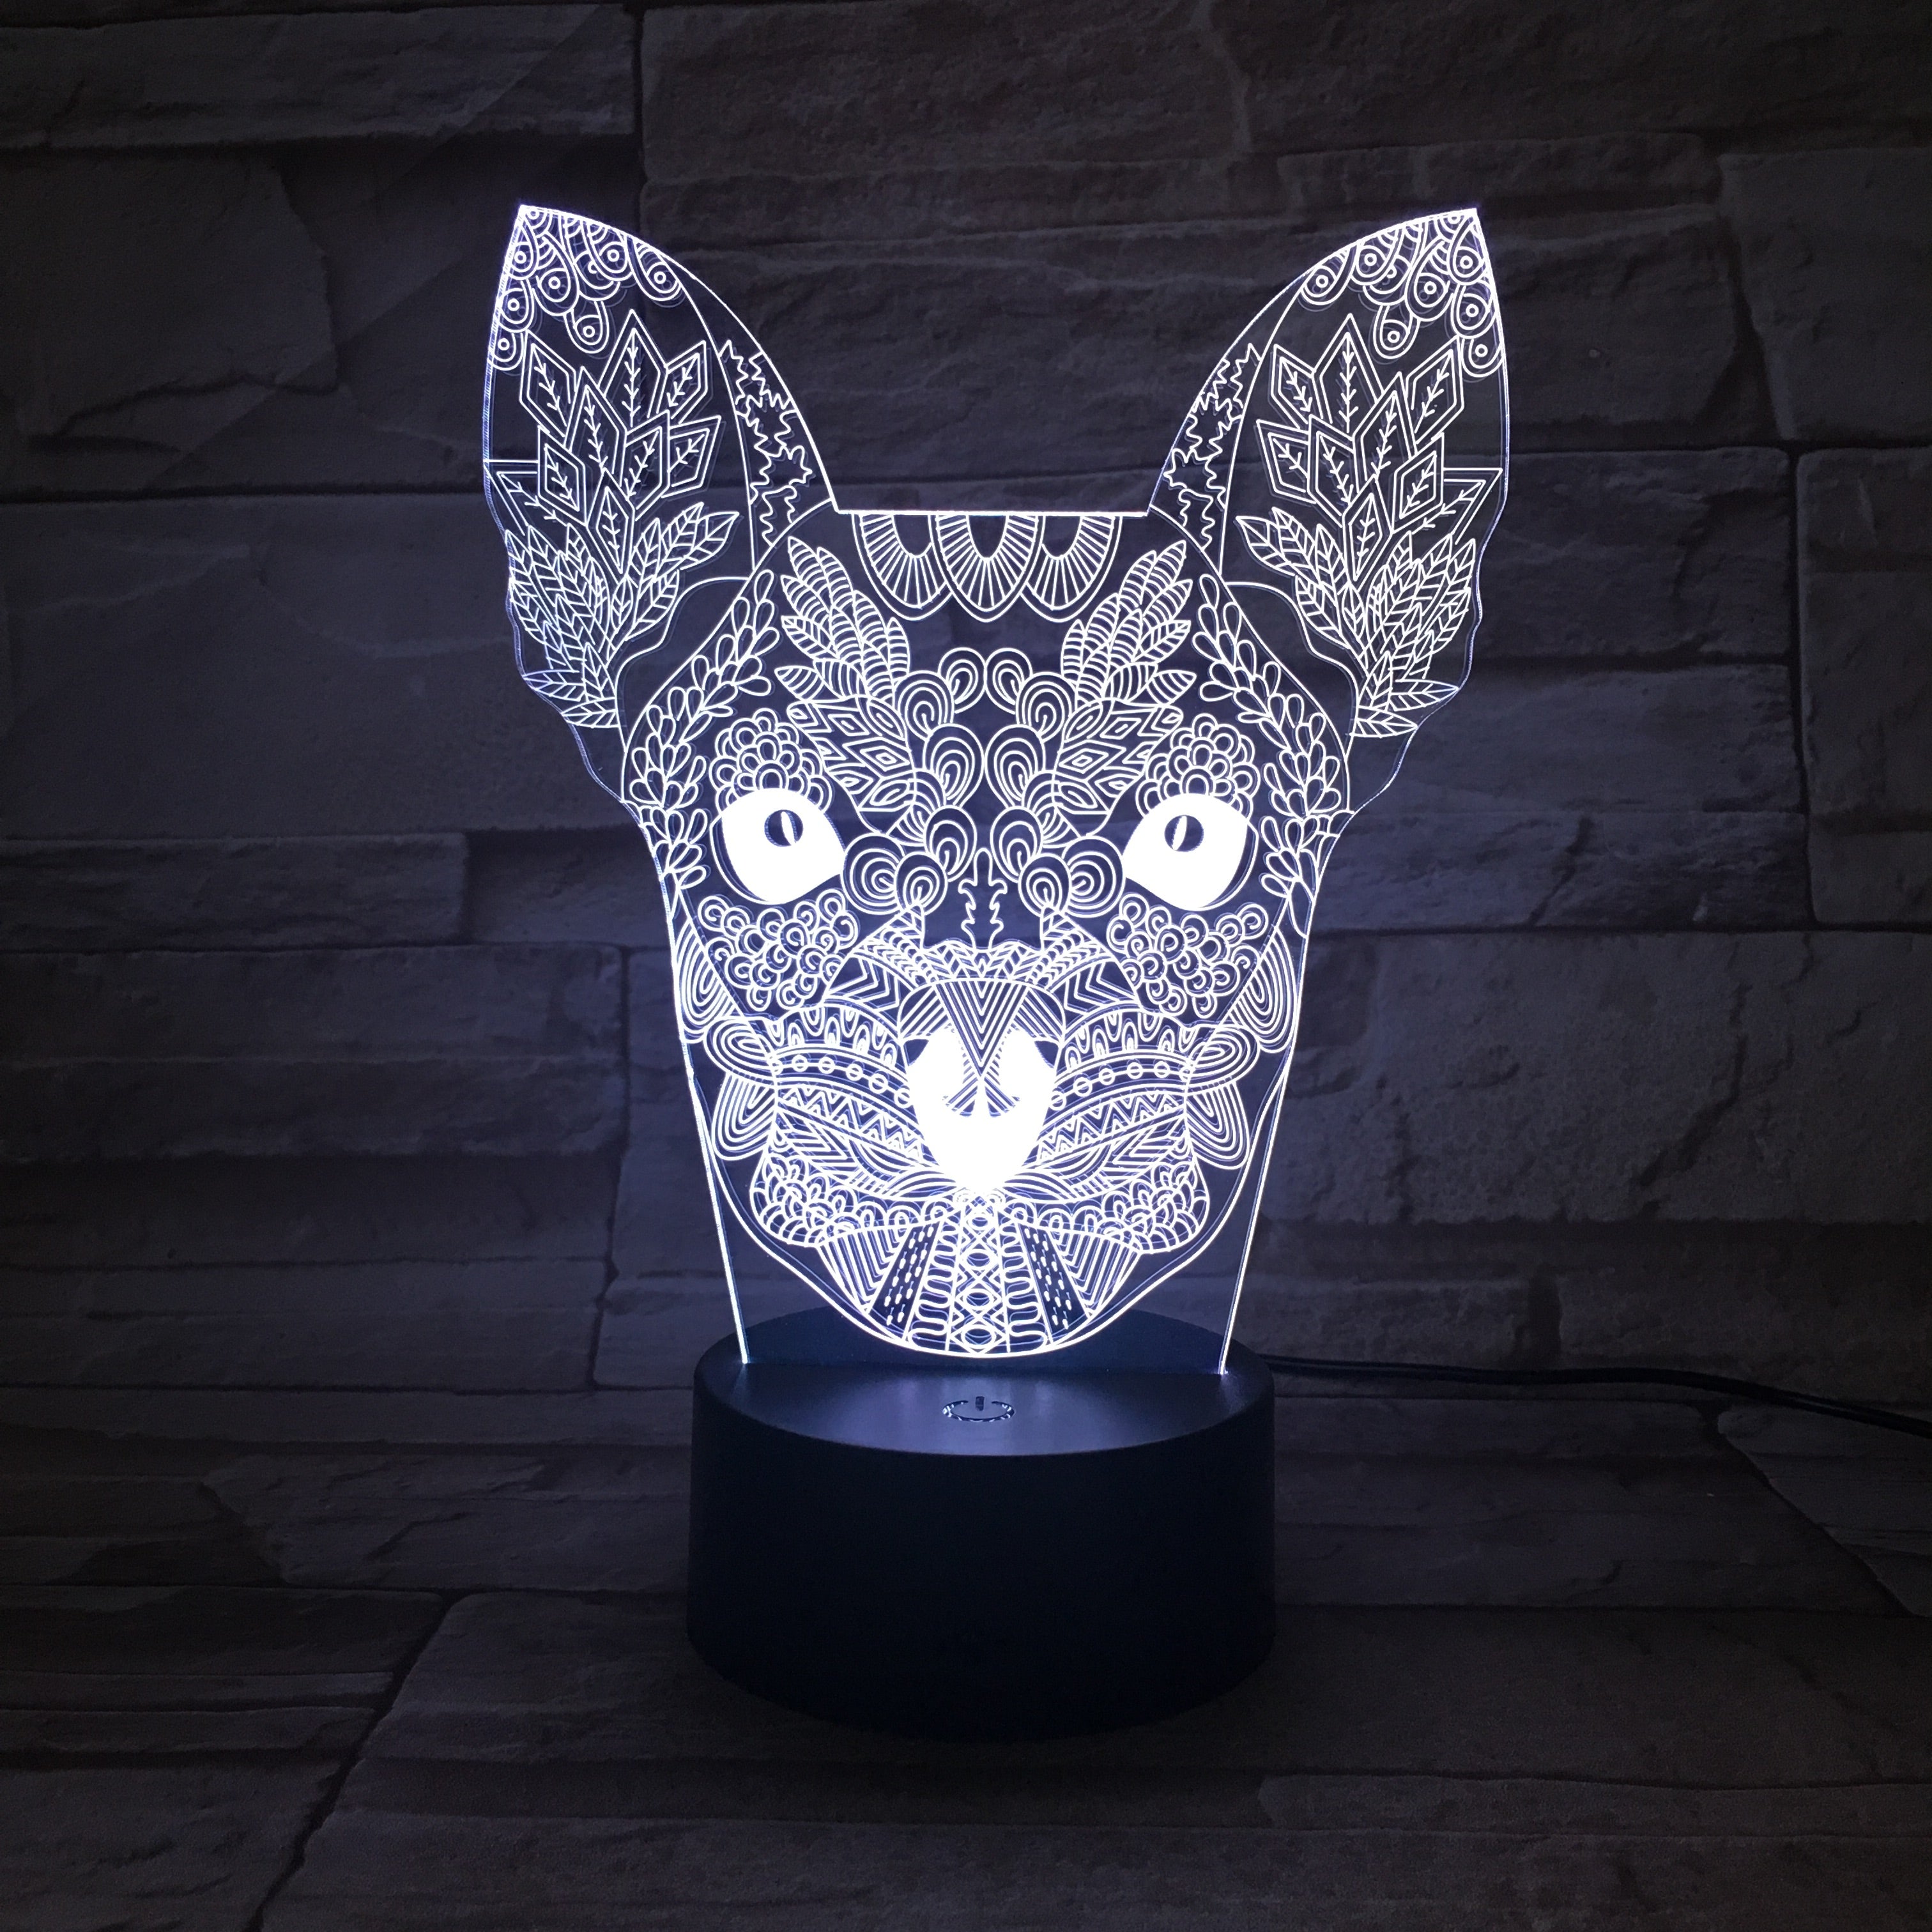 New Style Dog Colorful 3D Visual Touch Desk Table Light LED Acrylic Lamp Creative led night light Home Decor Holida AW-669